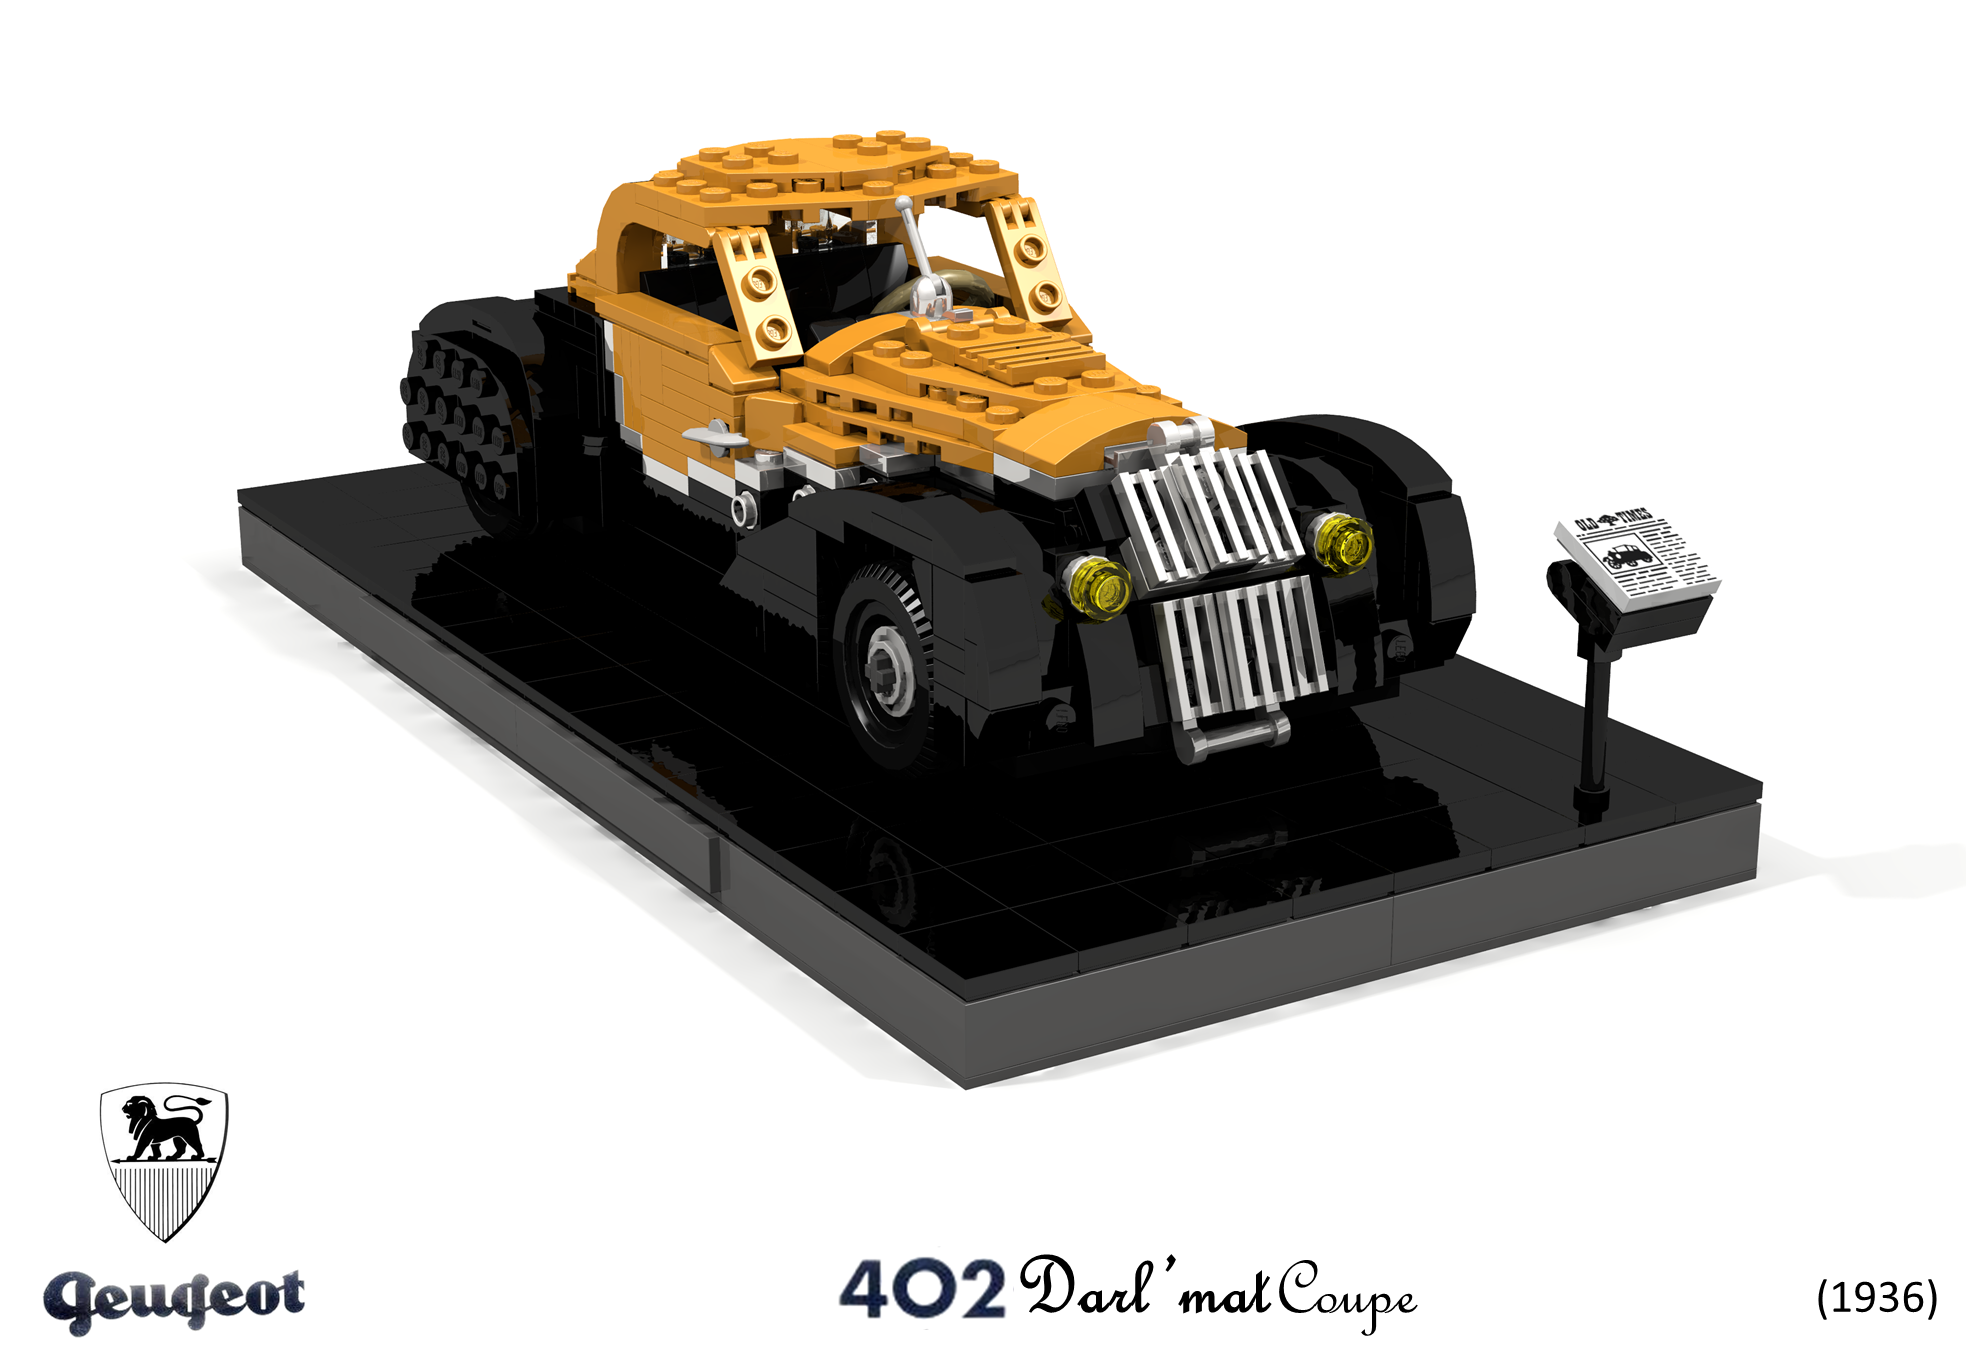 1936_peugeot_402_darlmat_coupe.png